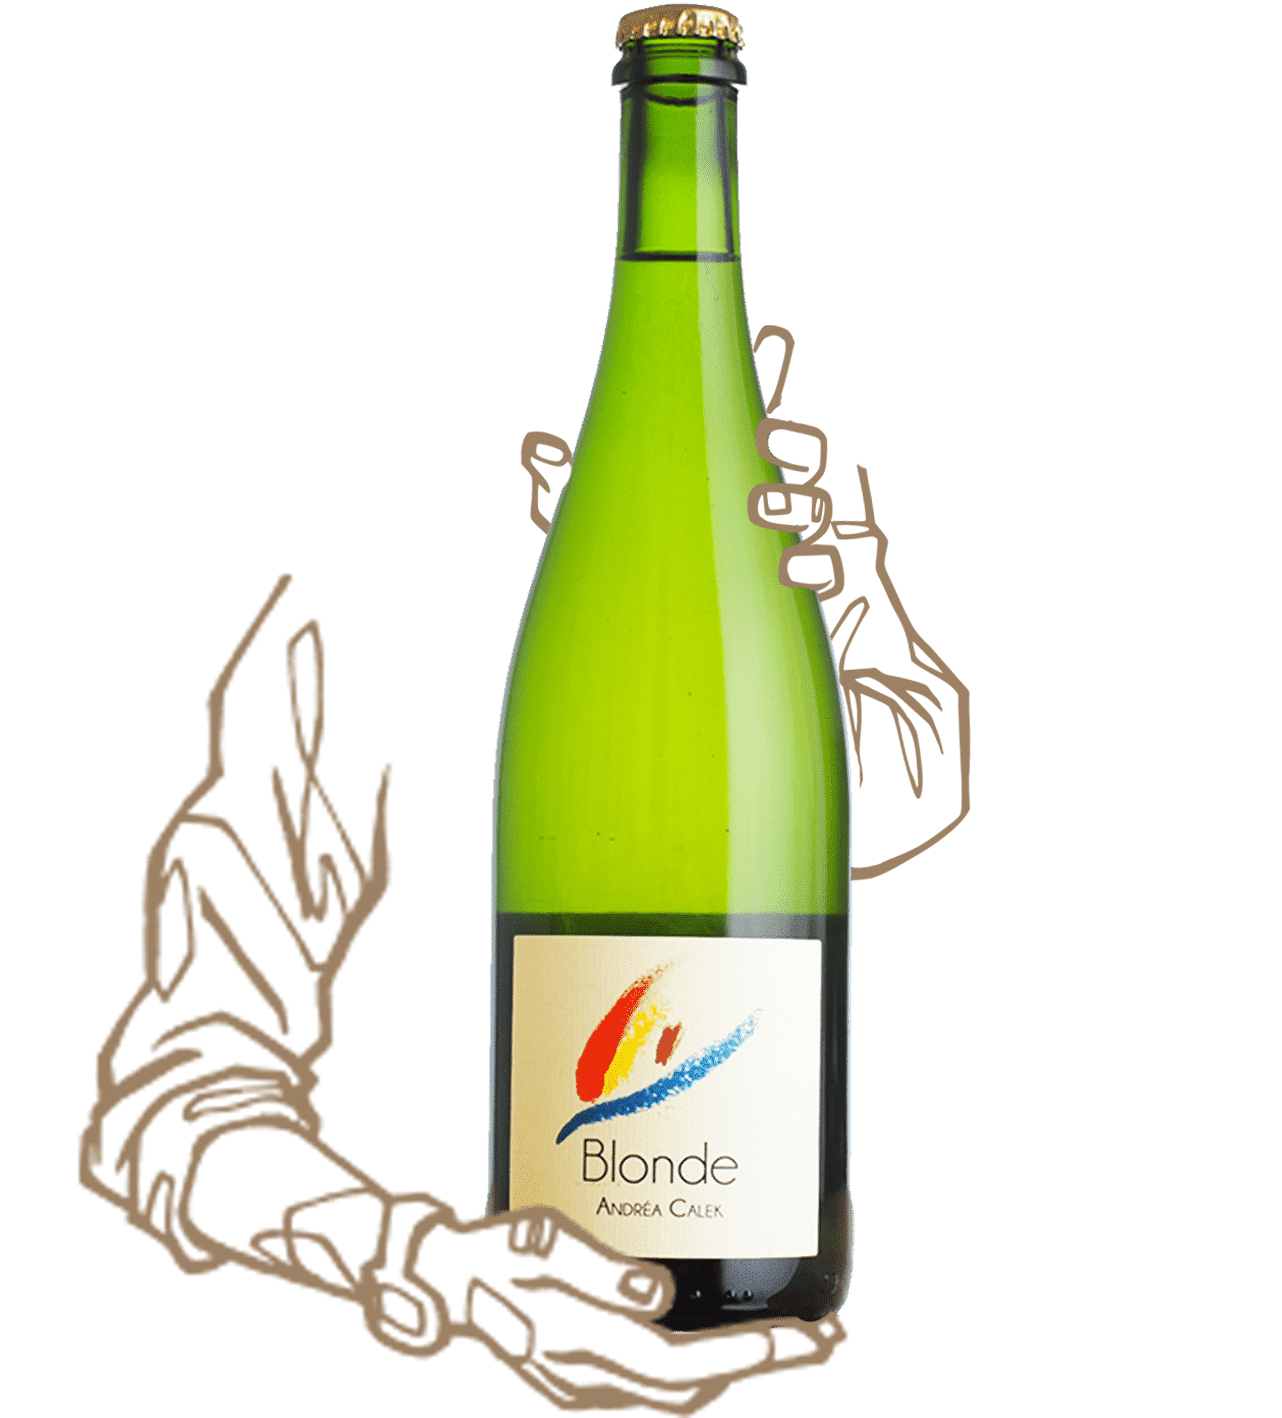 Blonde by Andrea Calek is a white natural wine with no added sulfite